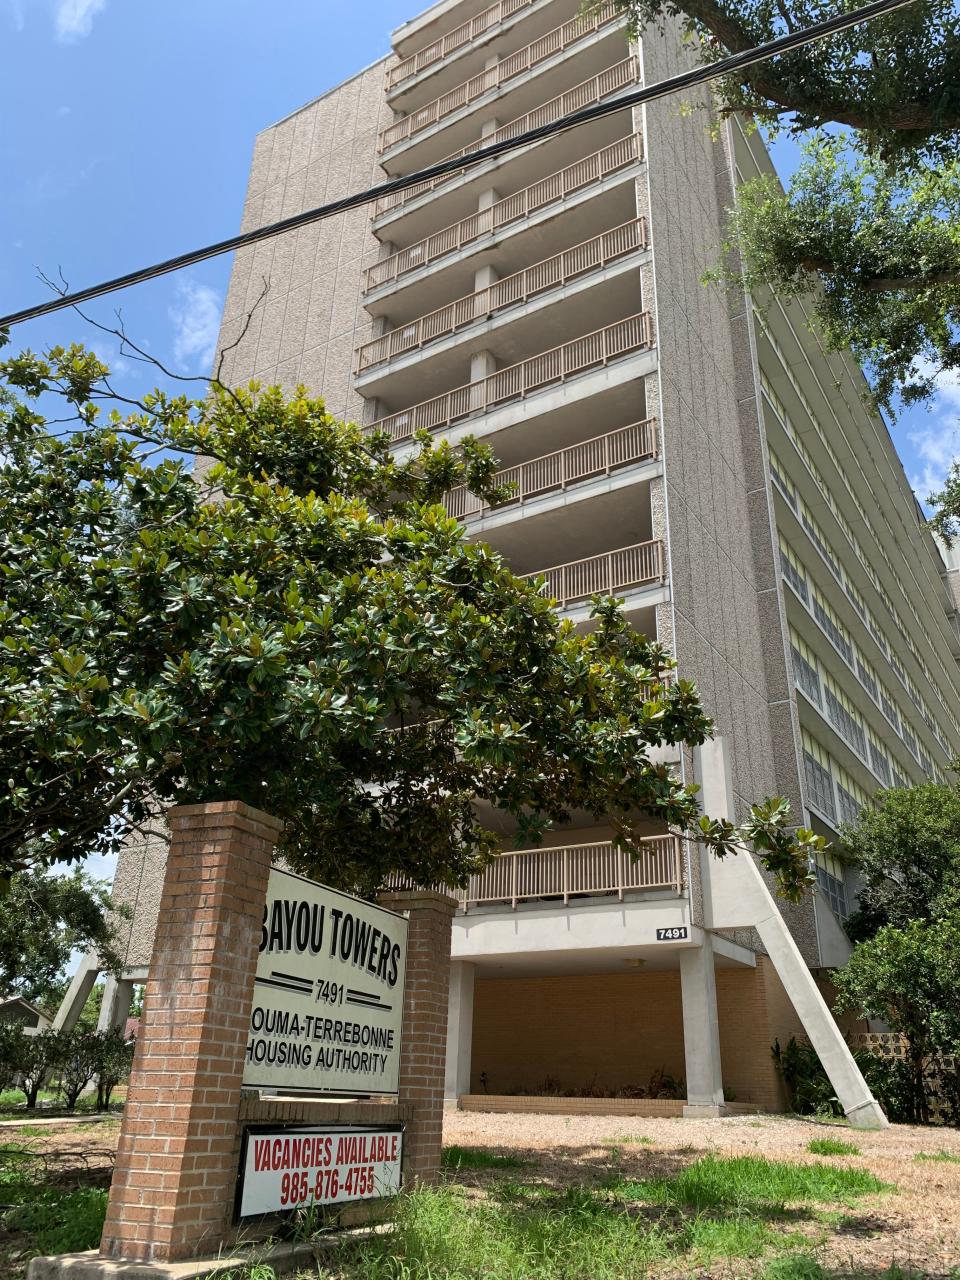 Bayou Towers, shown Monday, July 18, 2022, is off limits for tenants because the state Fire Marshal's Office has declared it unsafe. The high-rise's future remains uncertain nearly one year after Hurricane Ida caused severe damage there.